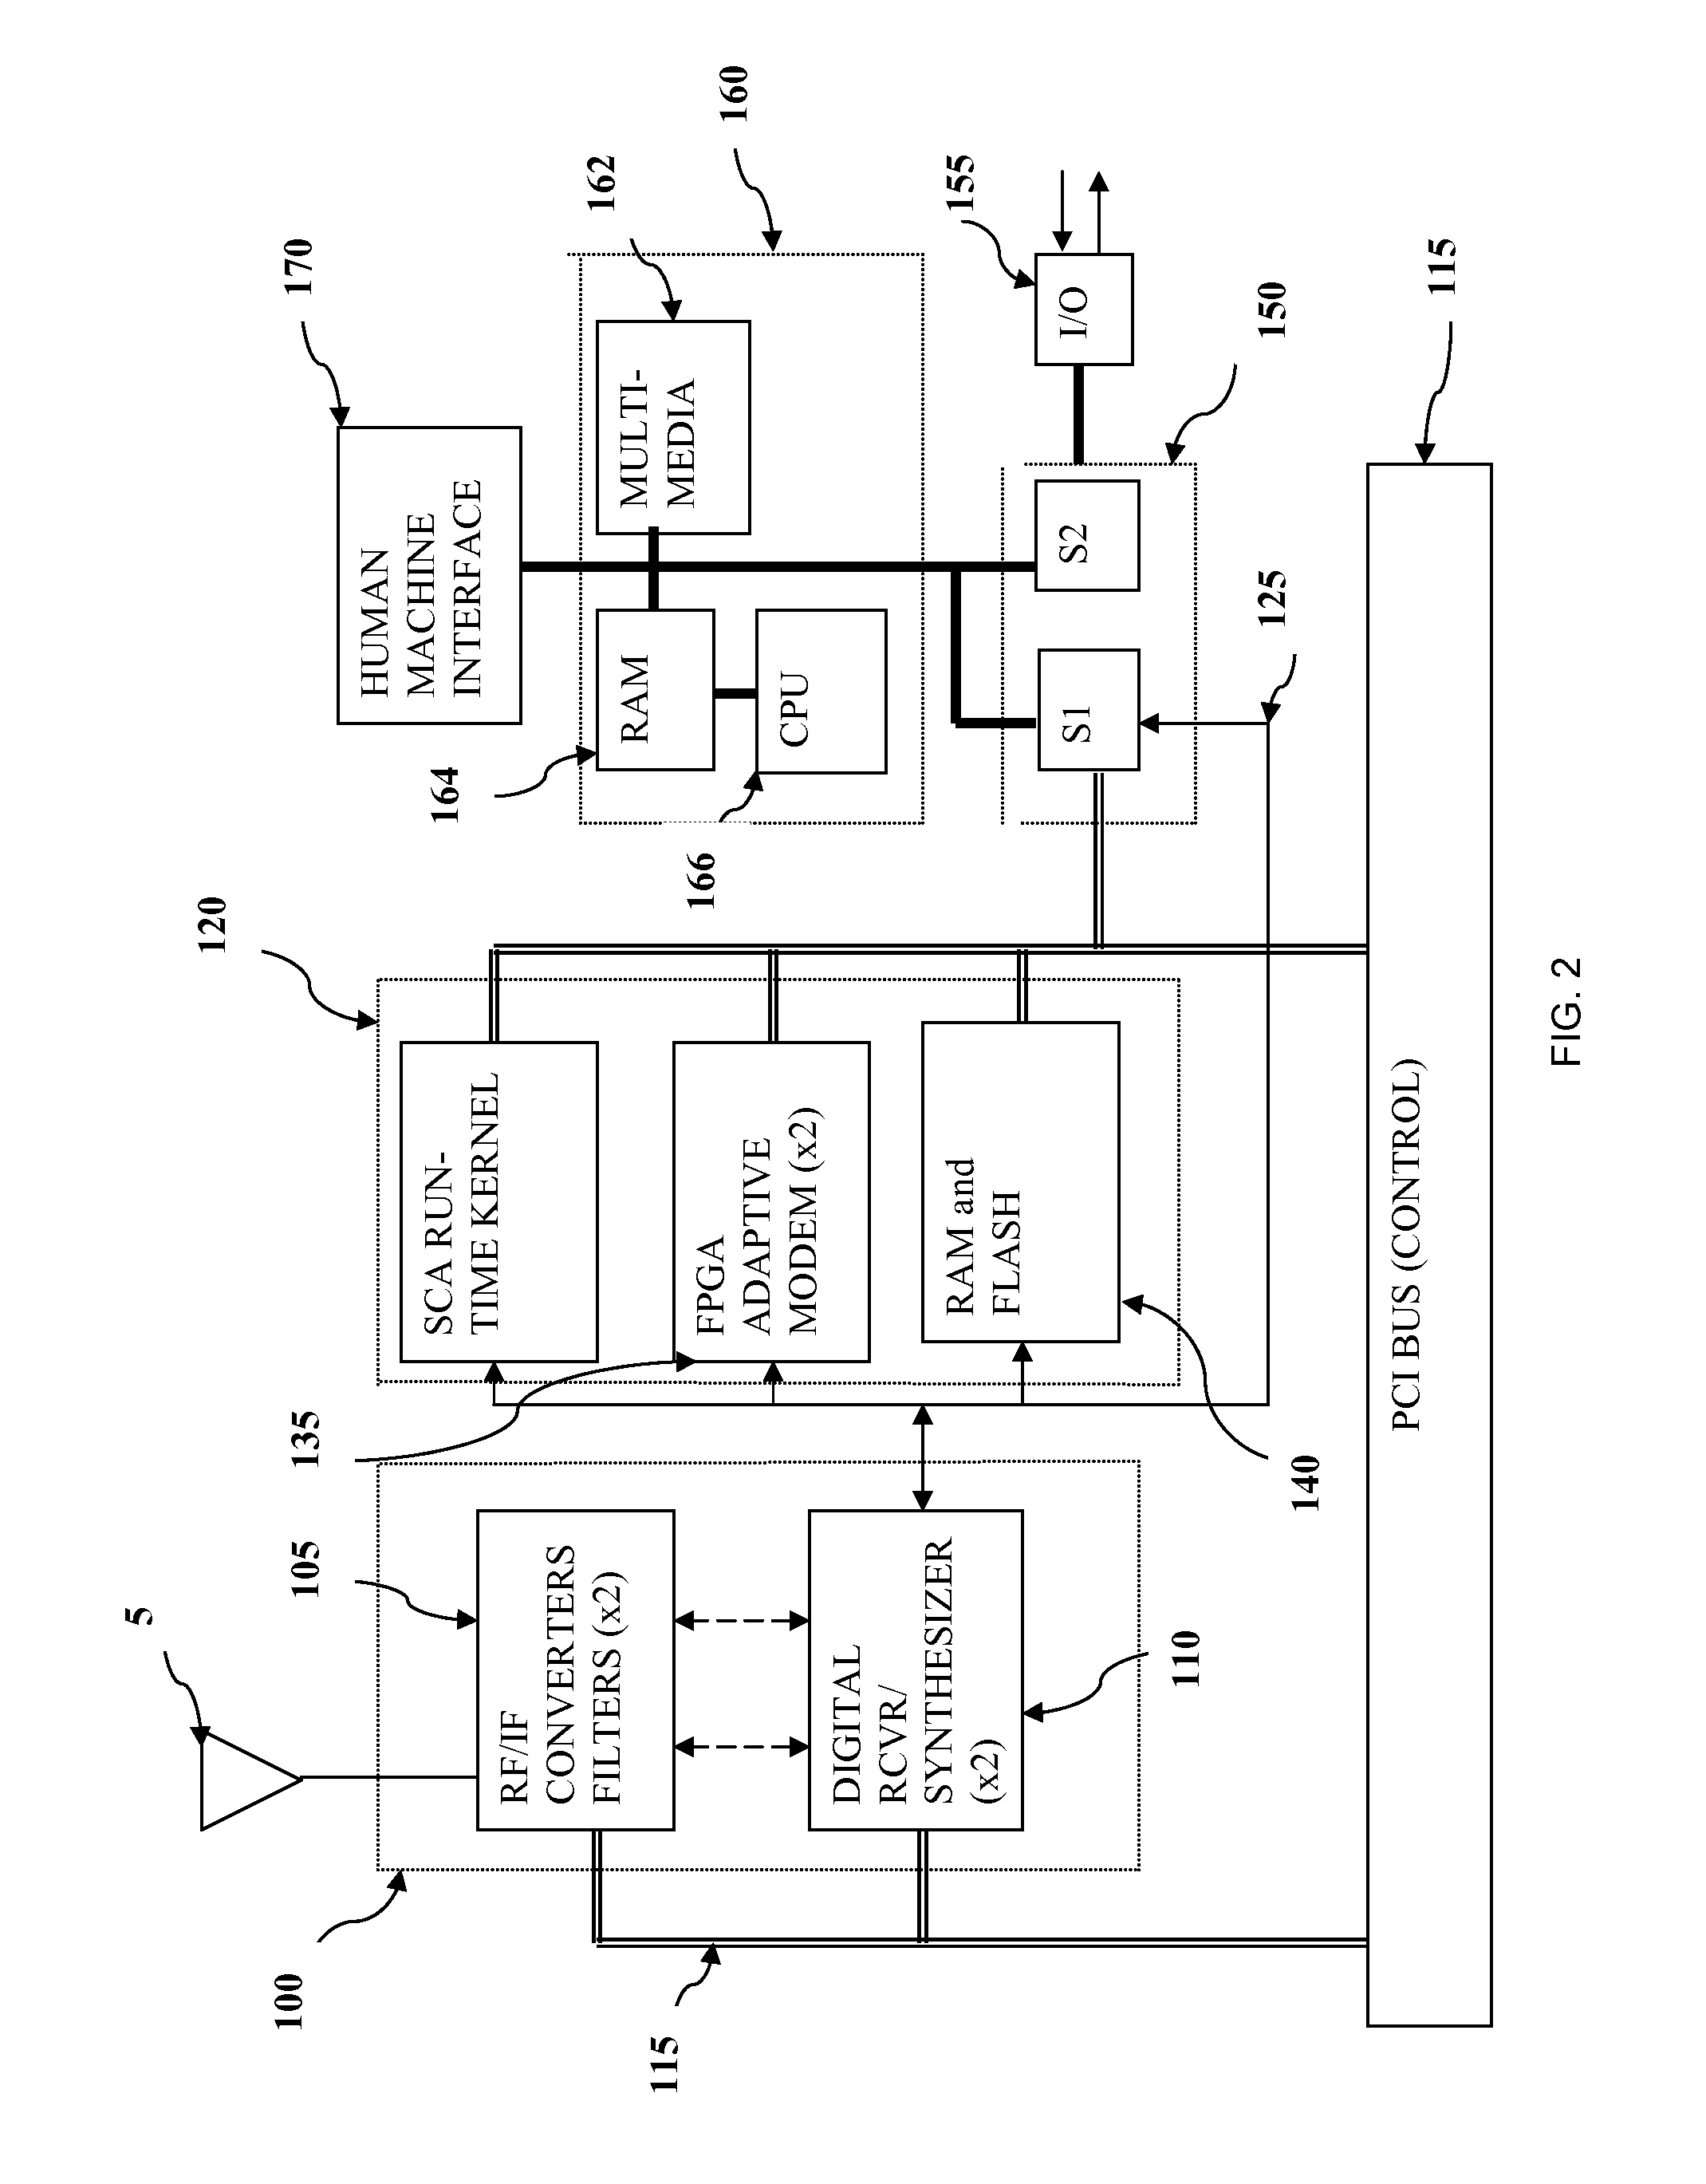 Programmable logic device with embedded switch fabric